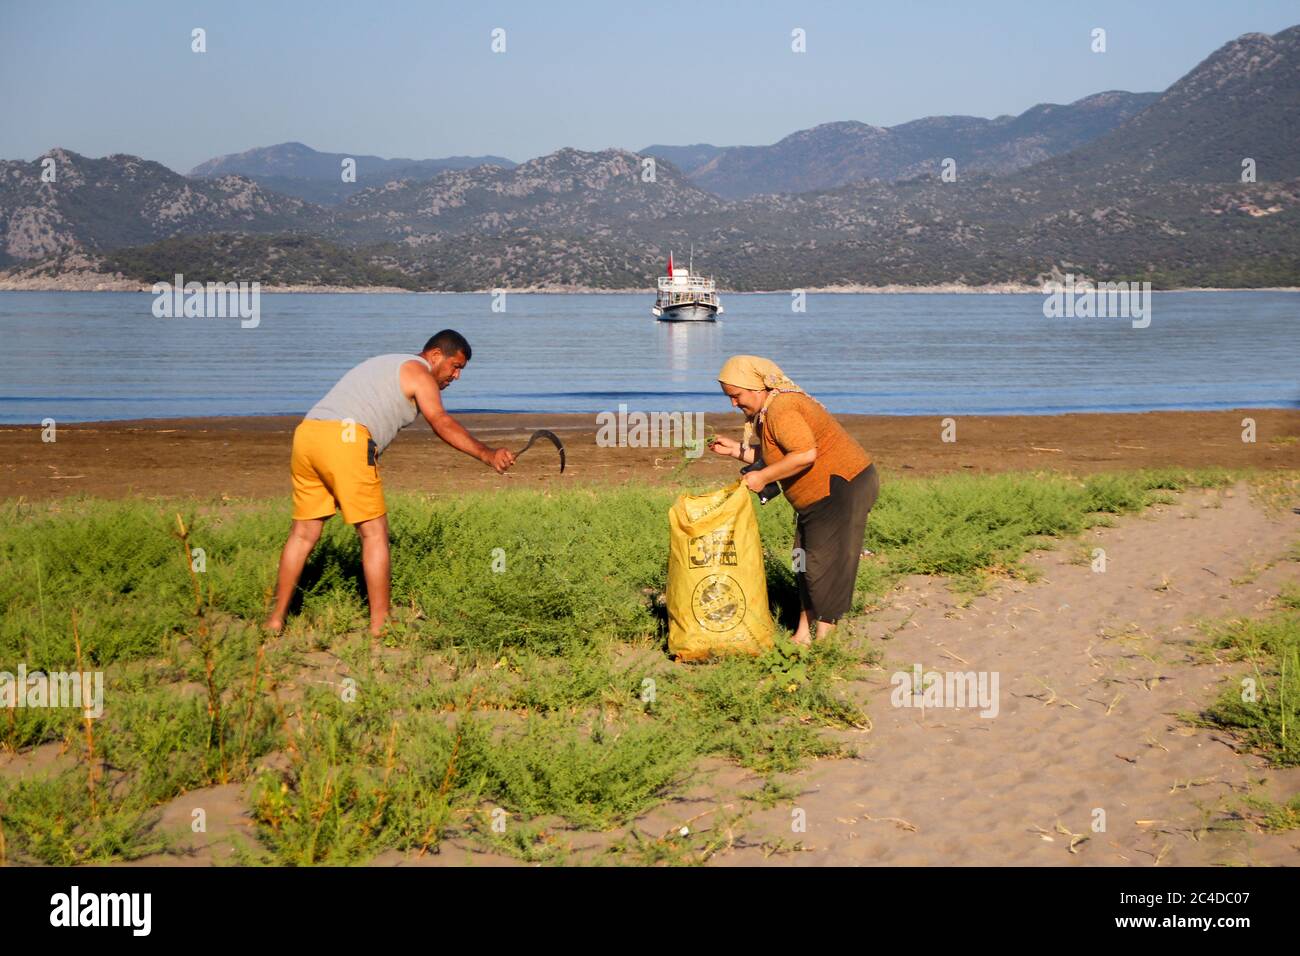 Local  people collecting herbs, weeds in the early morning on the beach. Demre - Antalya, Turkey Stock Photo